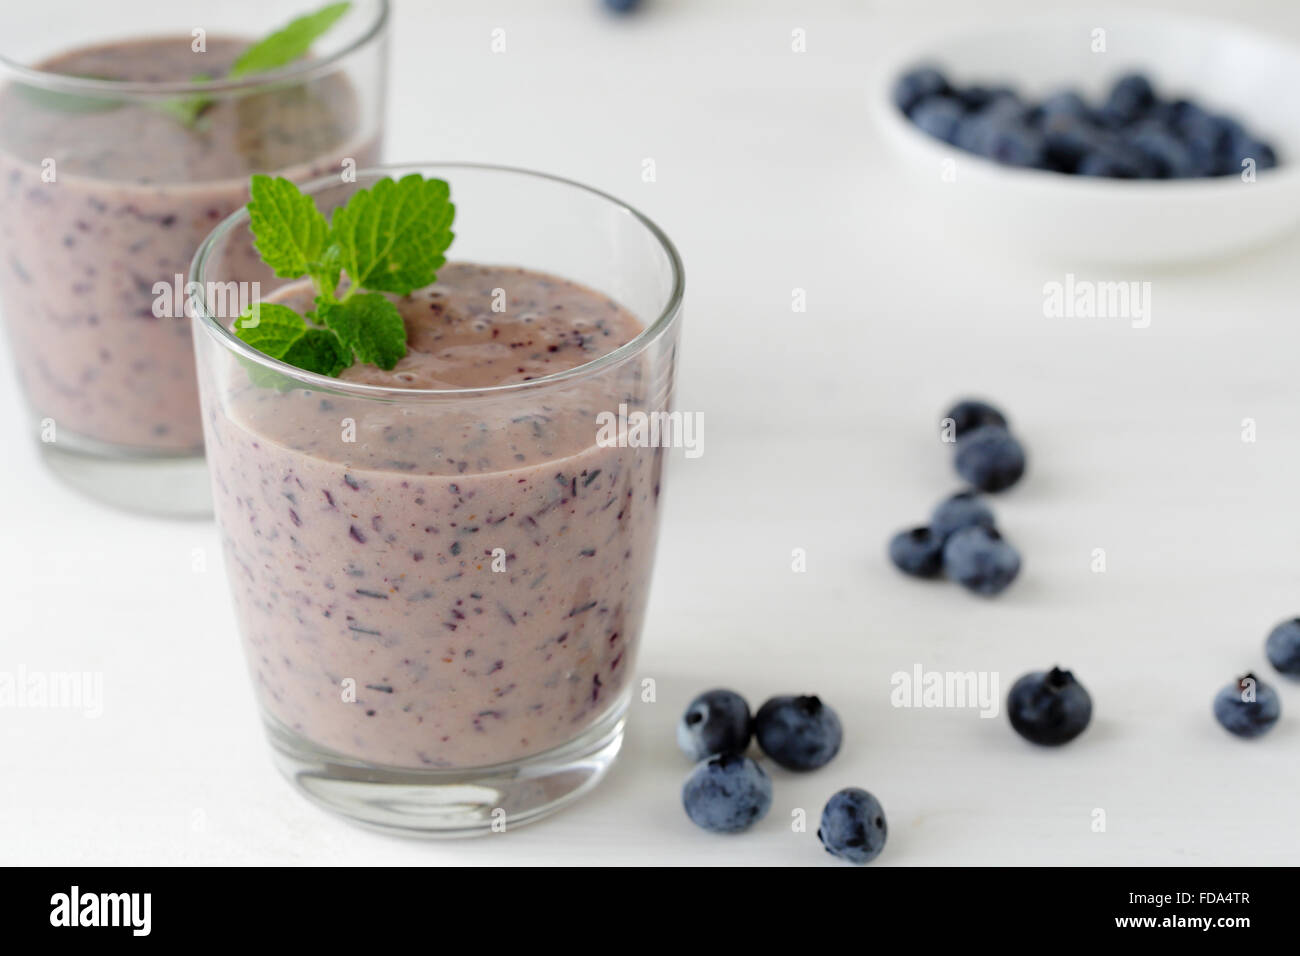 blueberry milk shake with berry, food close-up Stock Photo